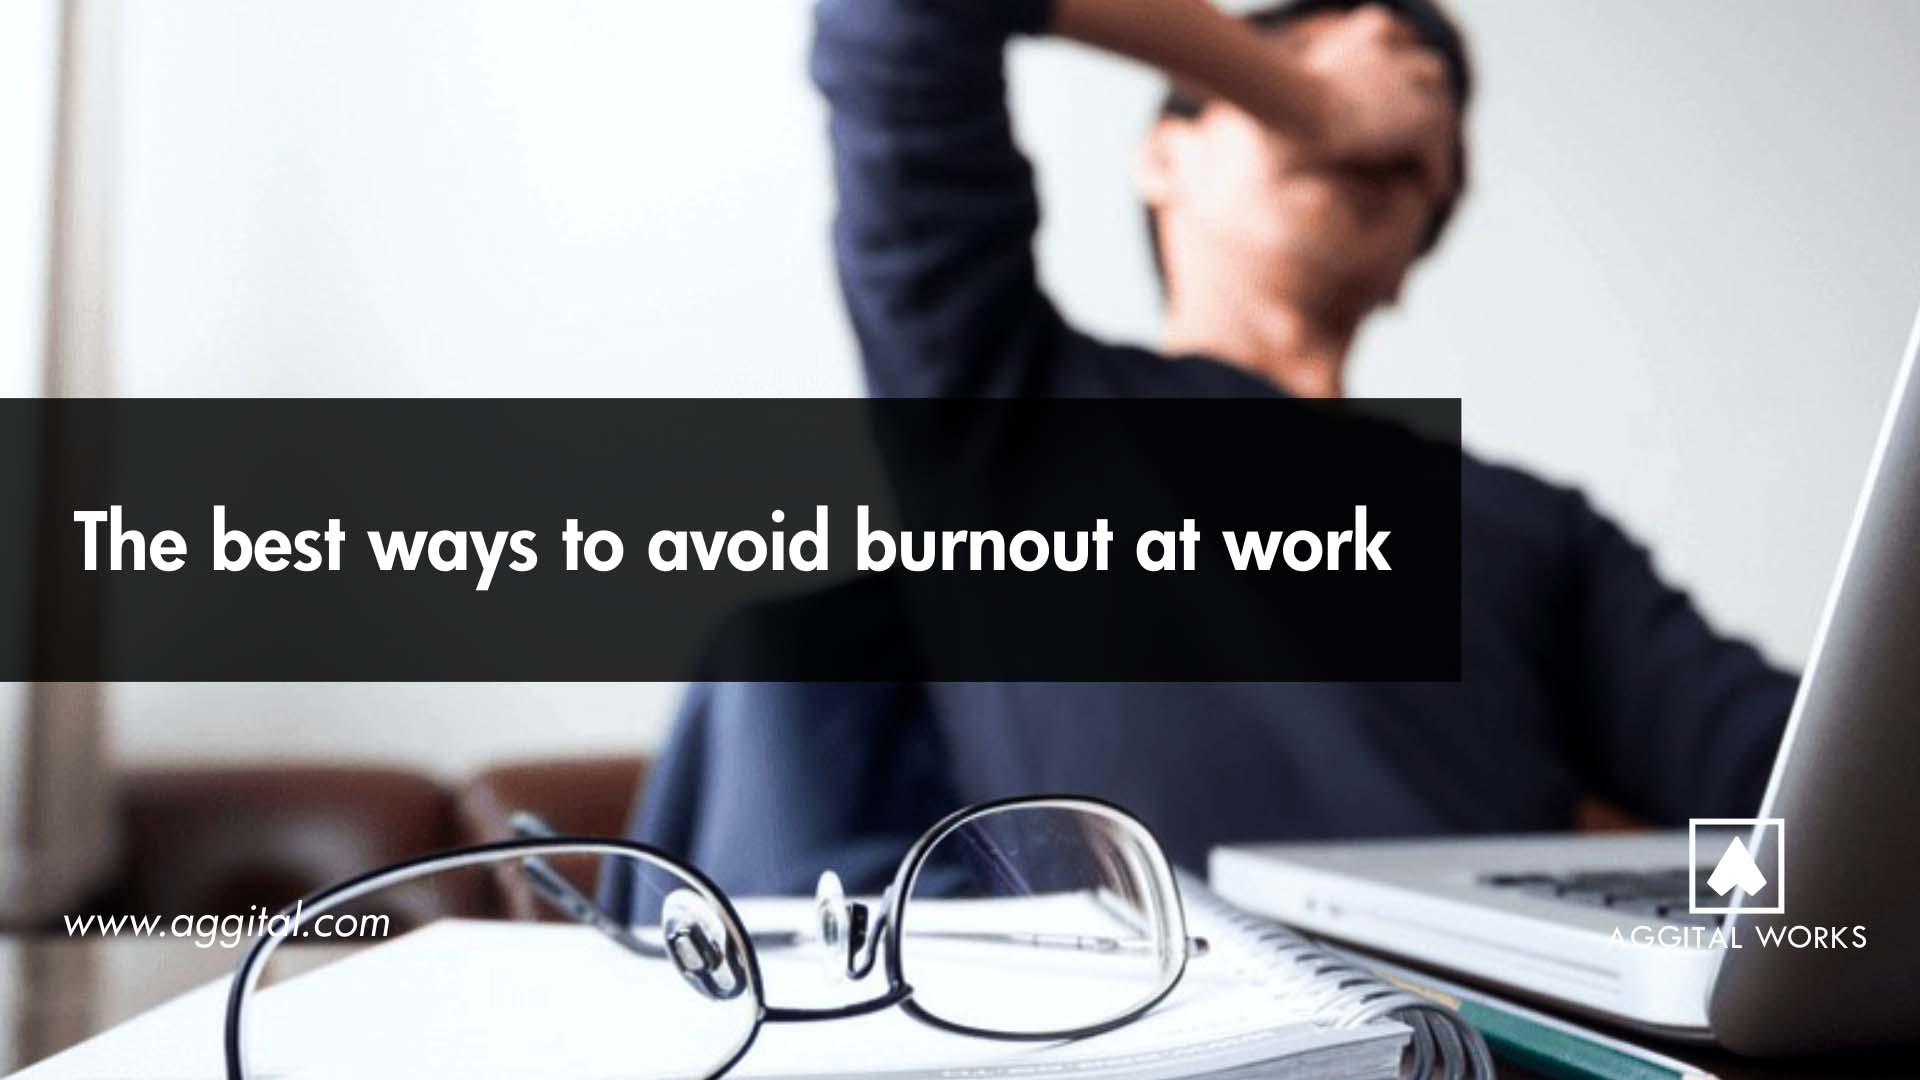 The Best Ways to Avoid Burnout at Work.